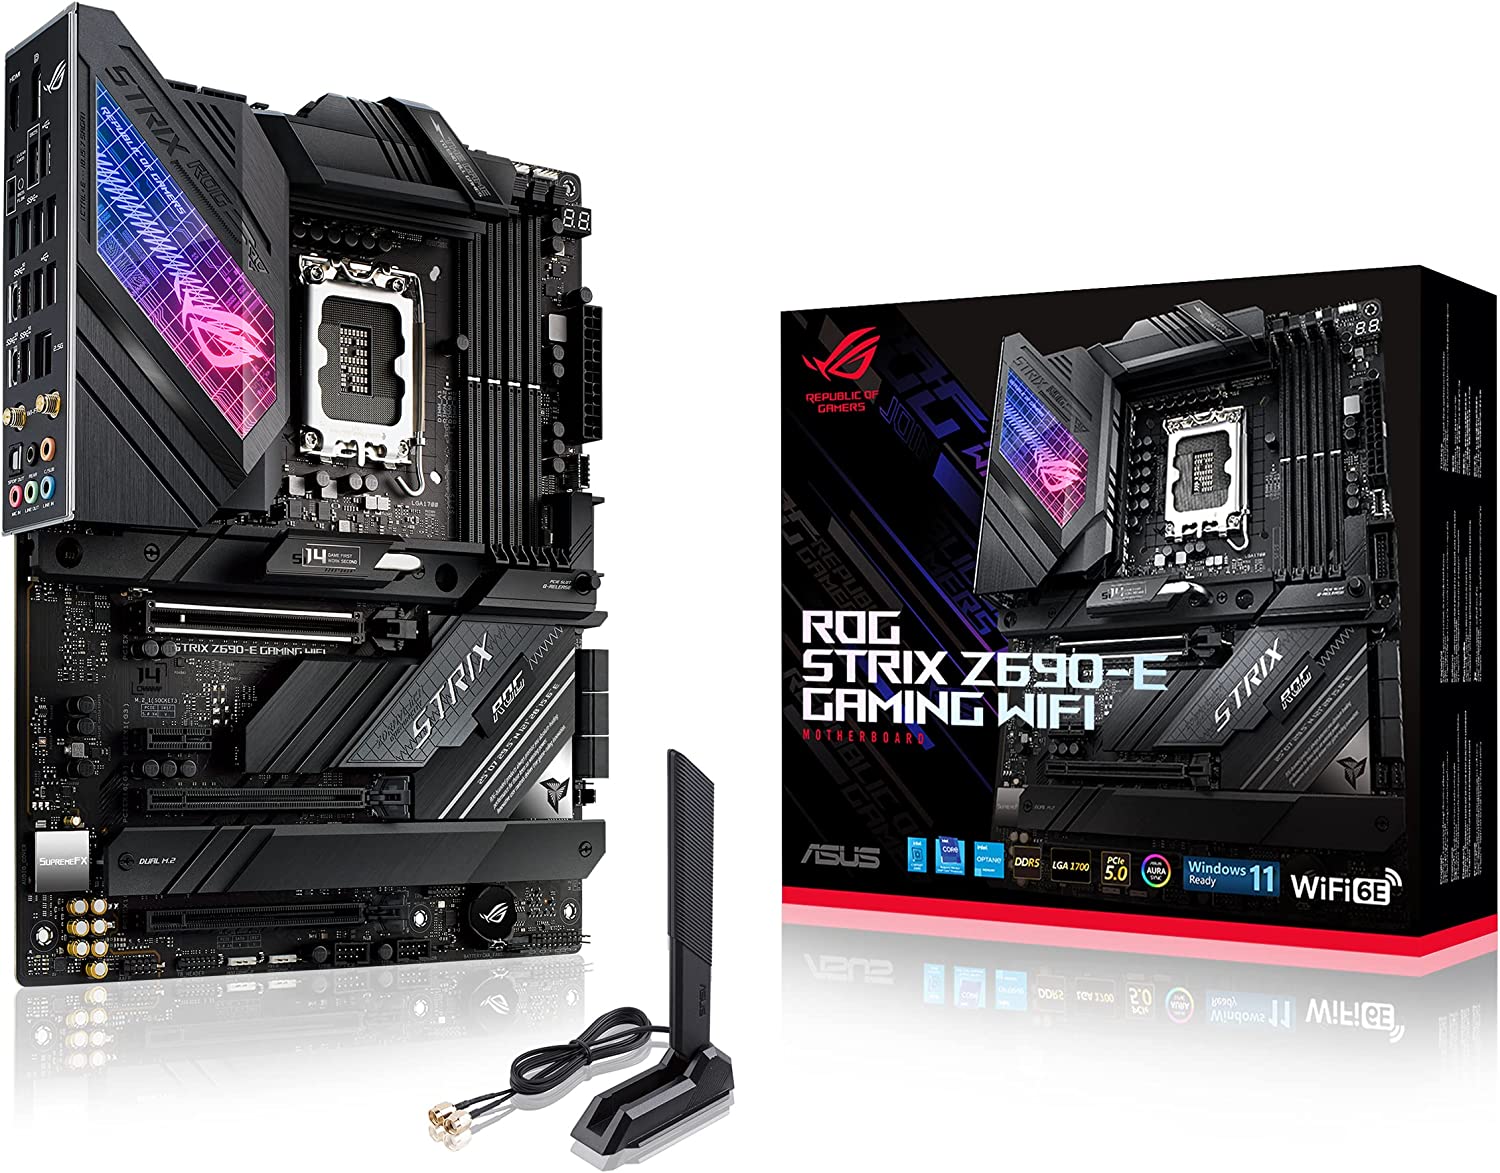 Best motherboards: For gaming, AMD Ryzen, and Intel